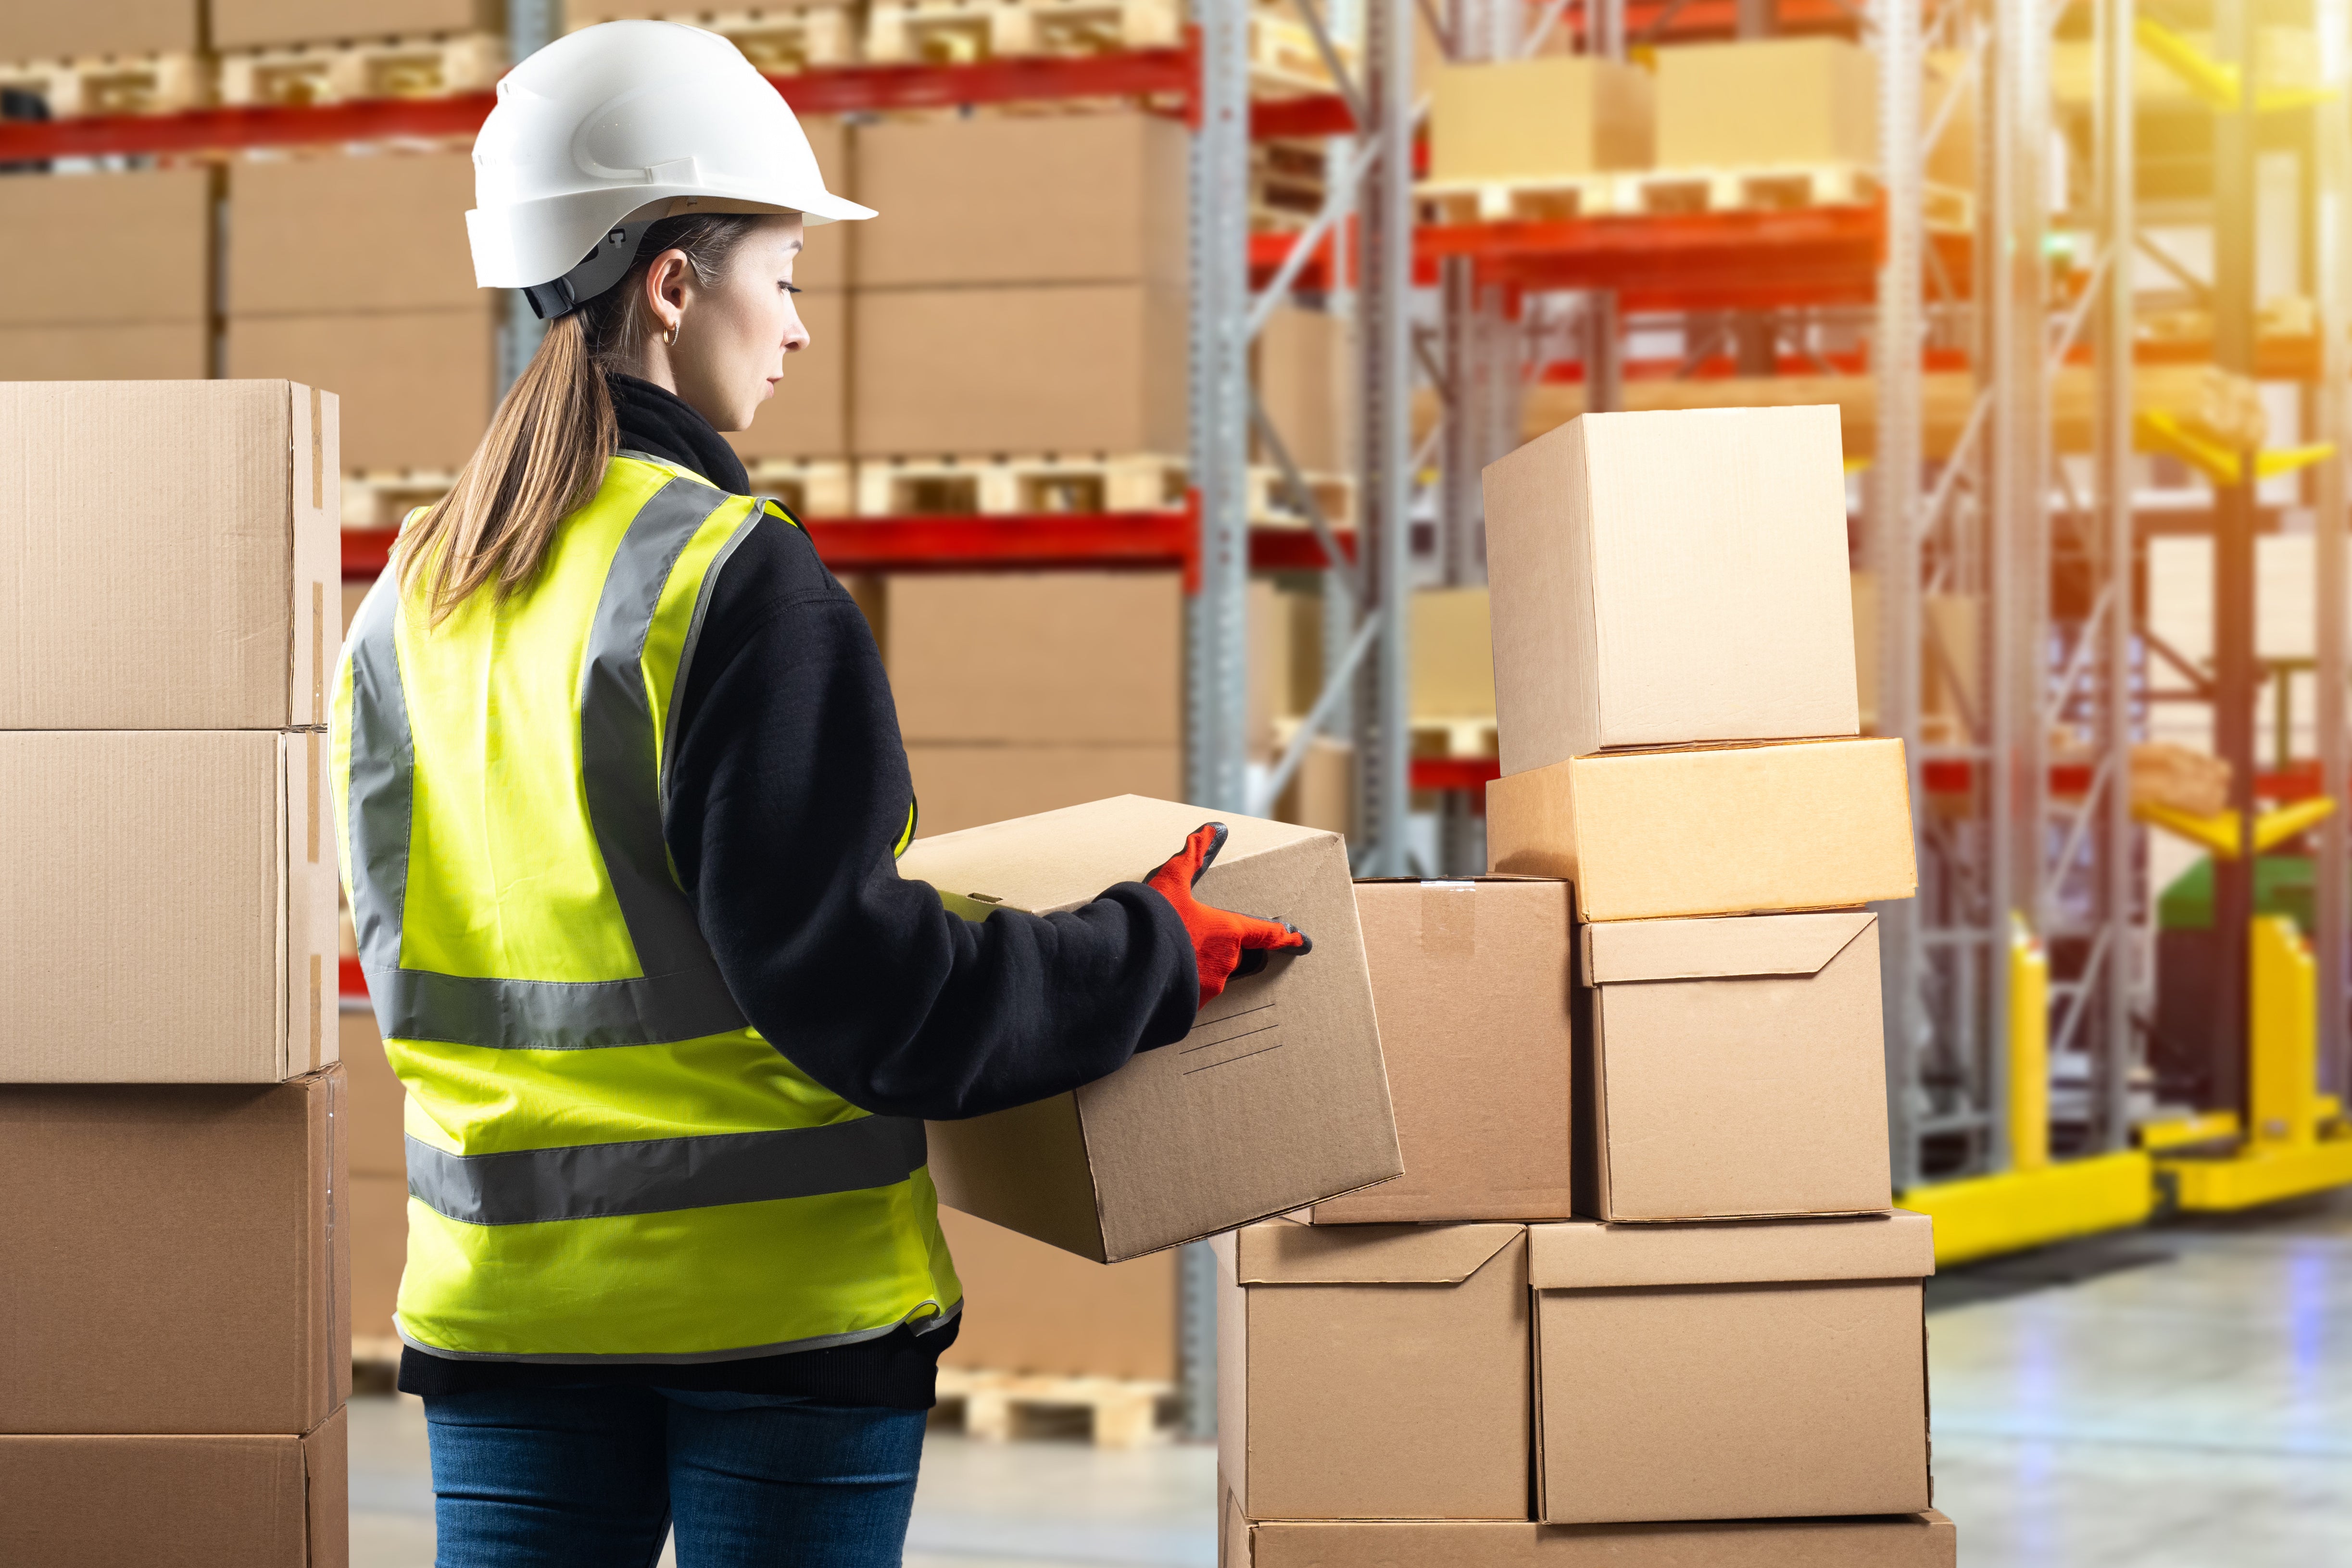 A warehouse working is shown in her hard hat and hi-viz vest stacking boxes.   This highlights the waste of boxes and cardboard shown on the racking unit behind her.